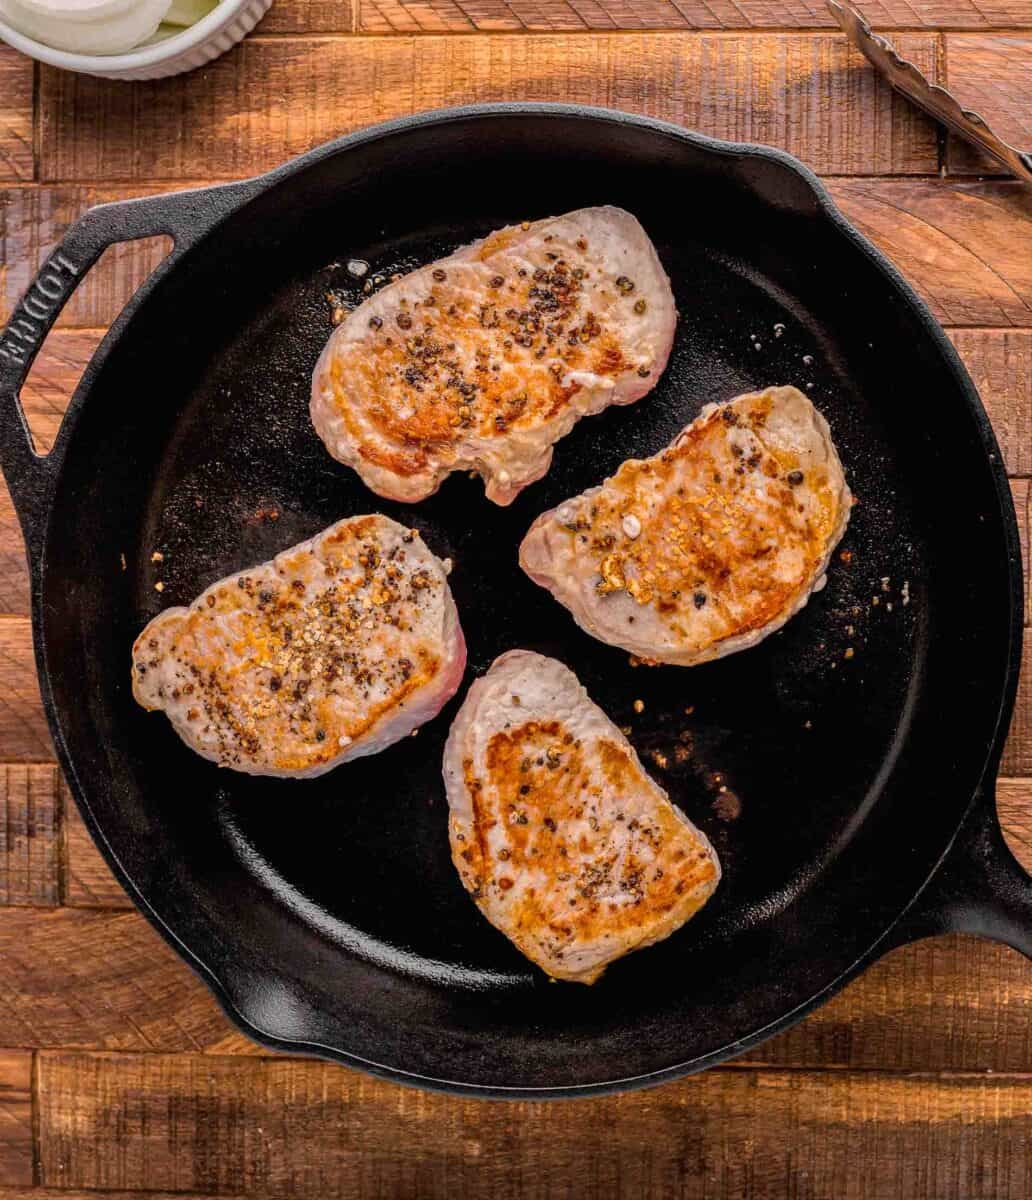 pork chops are being seared in a black skillet.